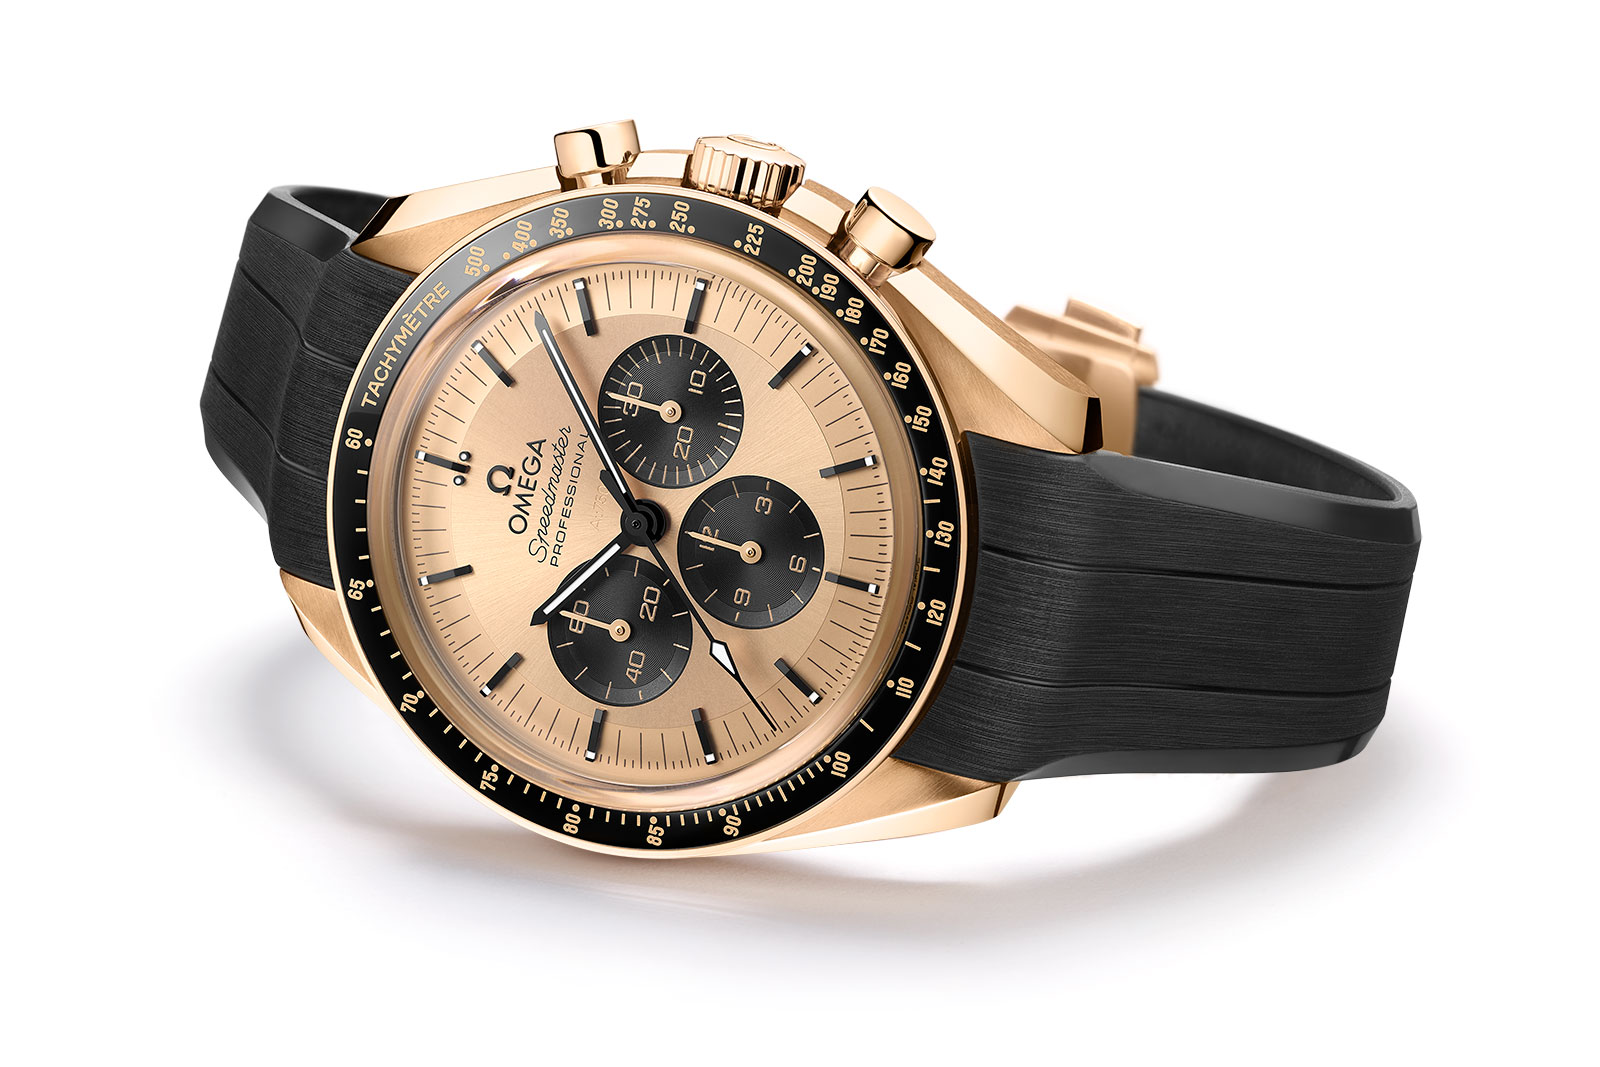 Omega Introduces the Speedmaster Moonwatch in Moonshine Gold | SJX